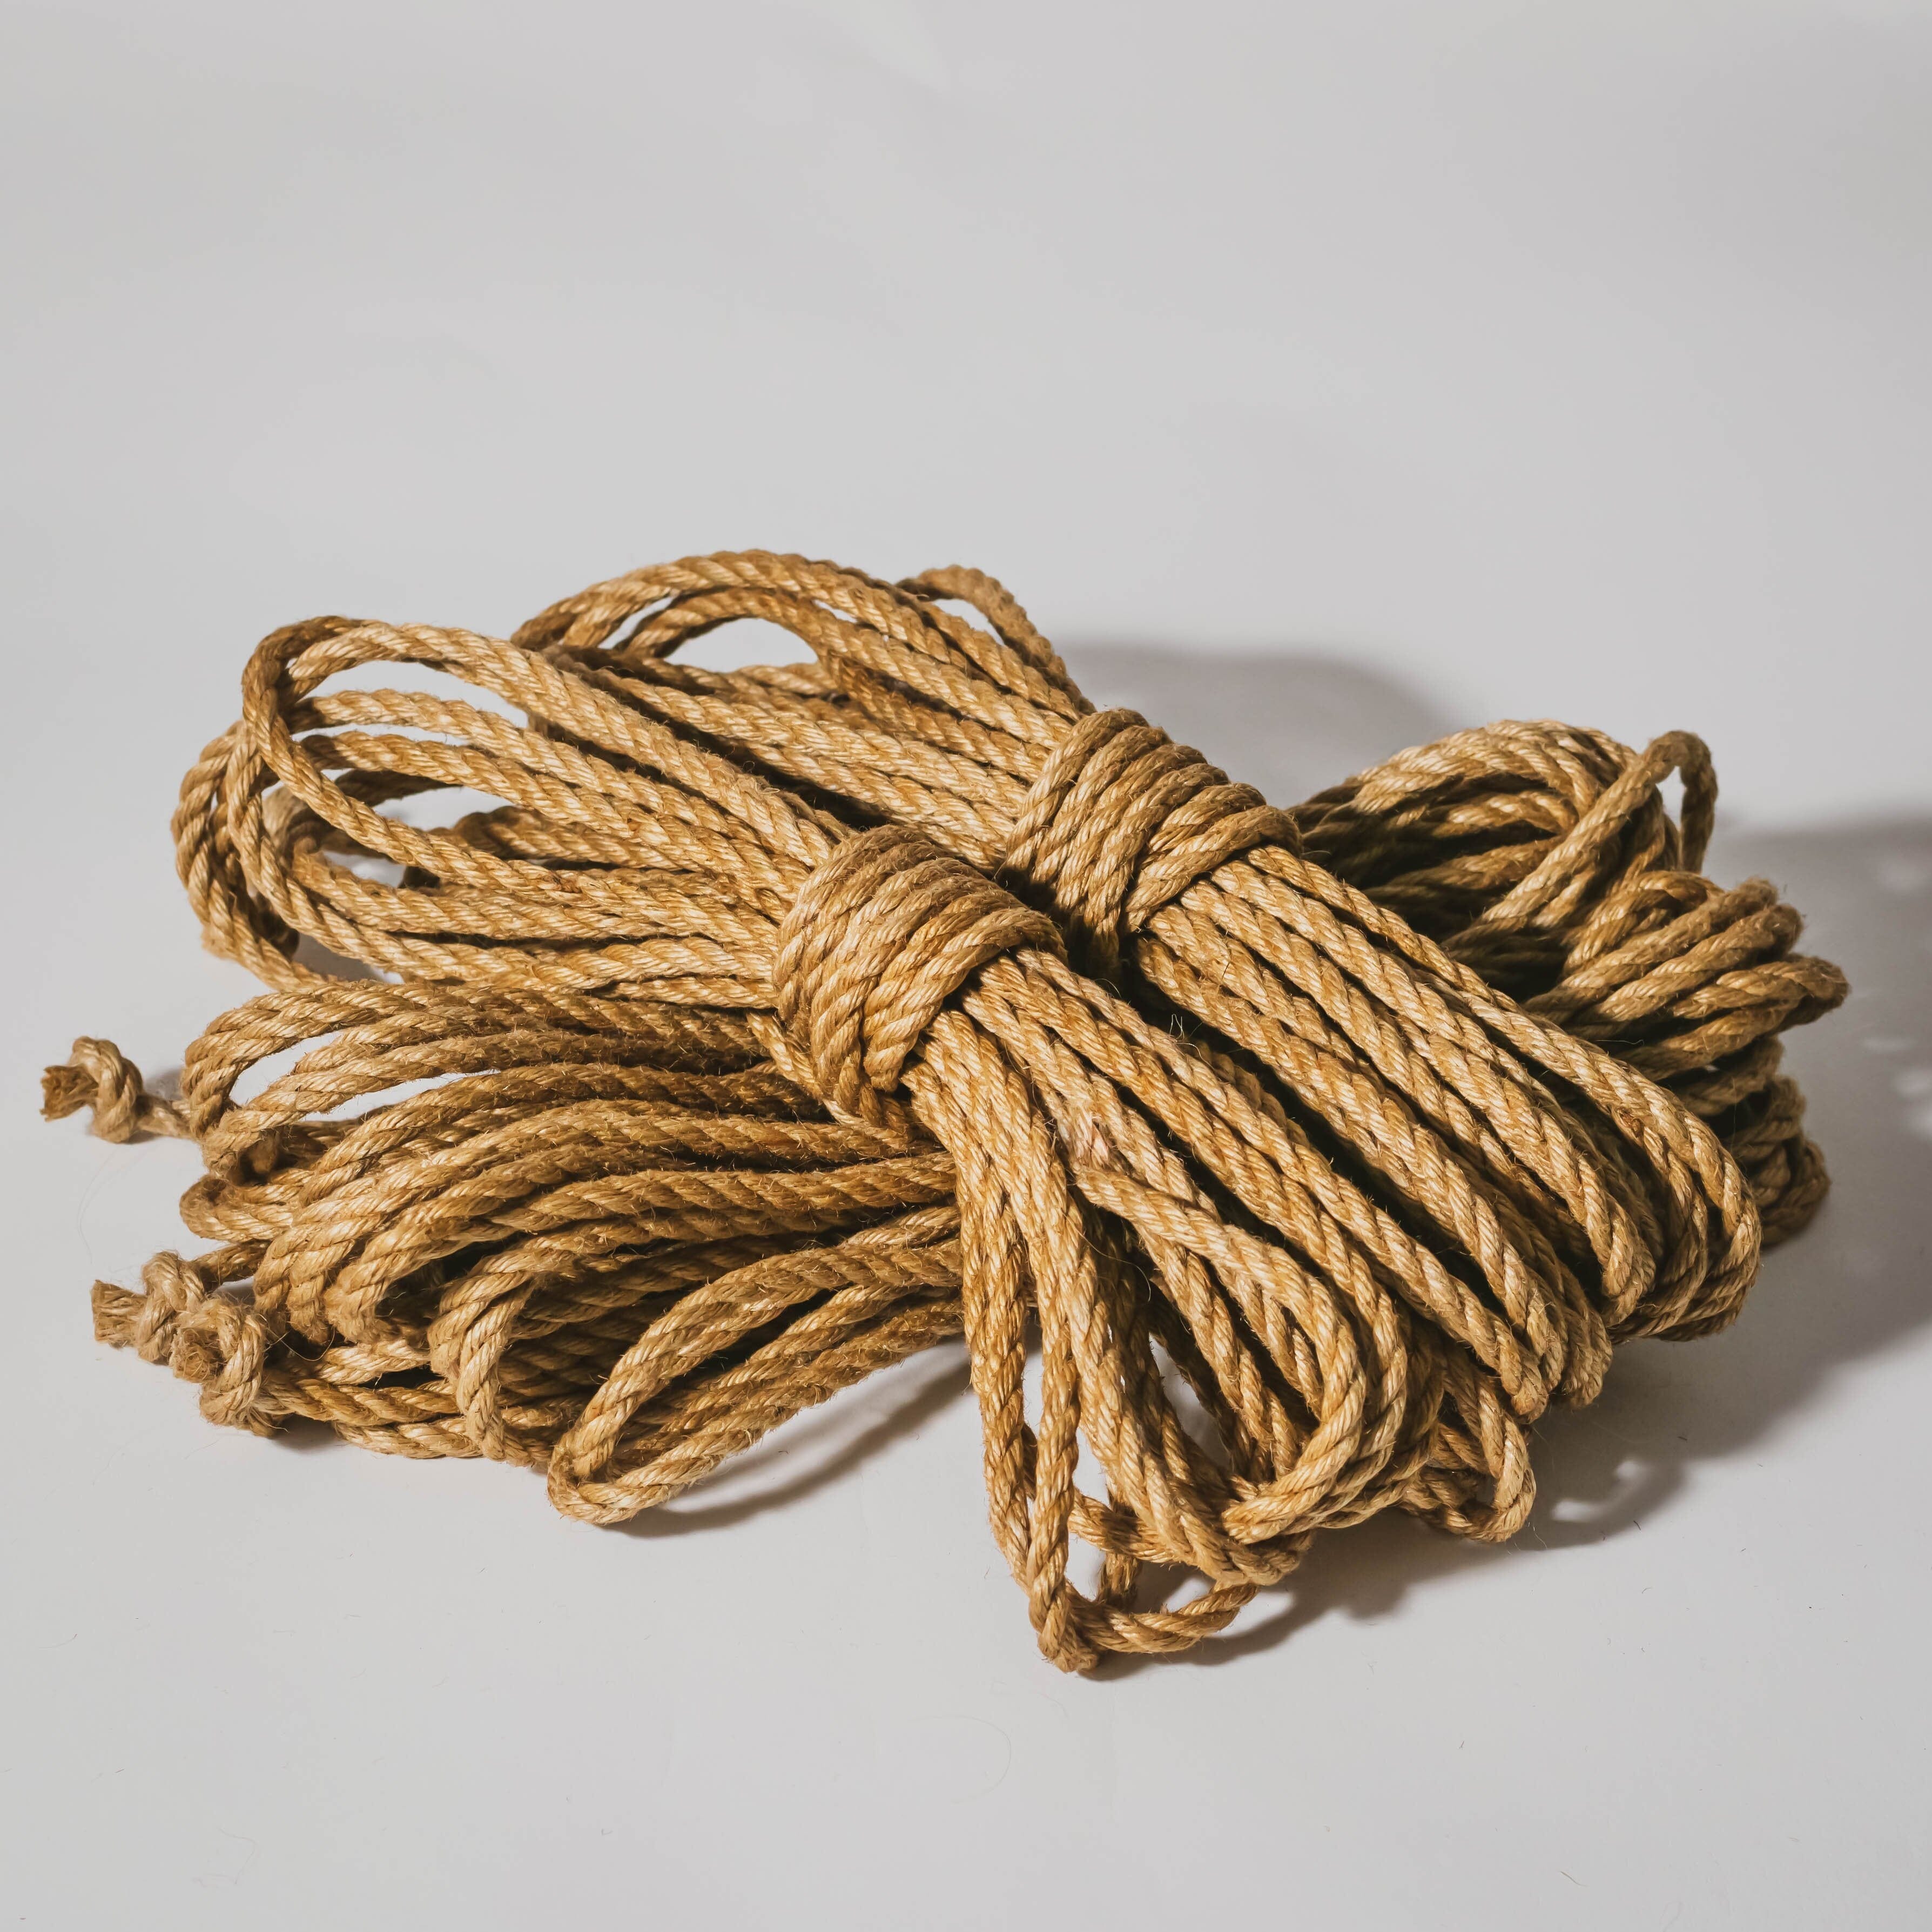 6mm Jute Rope at Rs 150/kg, Aminabad, Lucknow